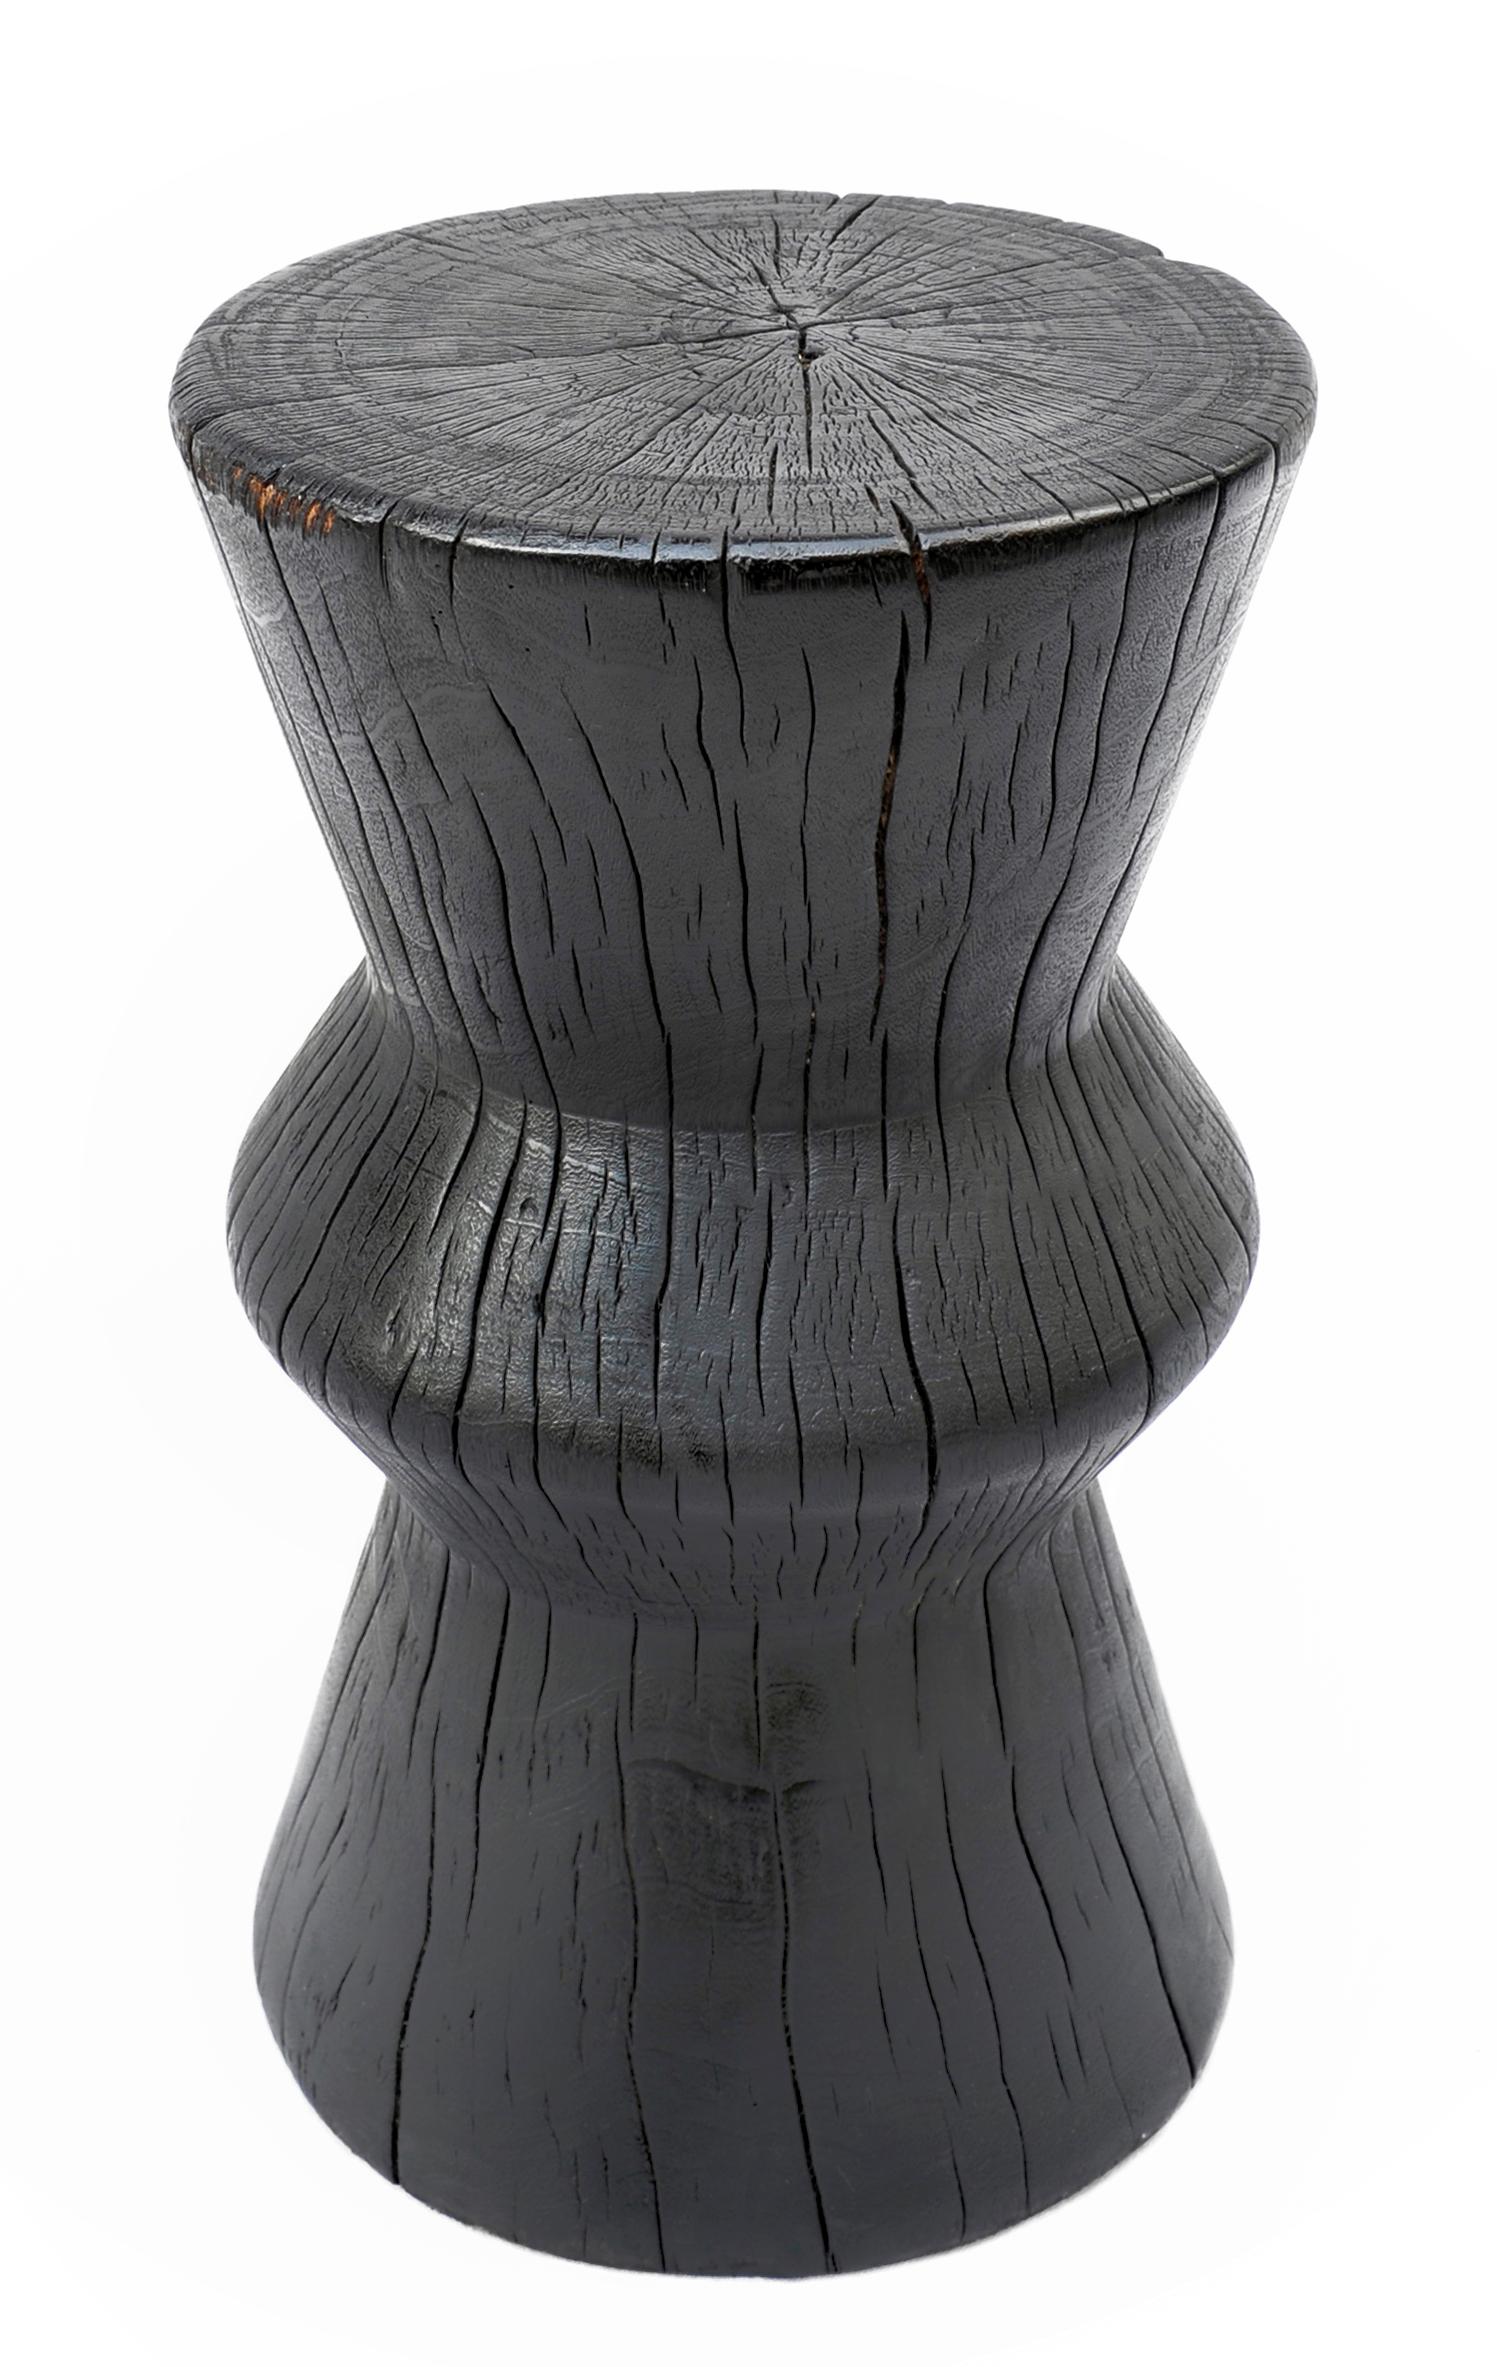 Solid hourglass shaped tamarind wood side table. Burnt, sanded and sealed.

The Triple Burnt collection represents a unique line of modern furniture made from solid organic wood. Burnt three times to produce a rich, charcoal finish with impressive